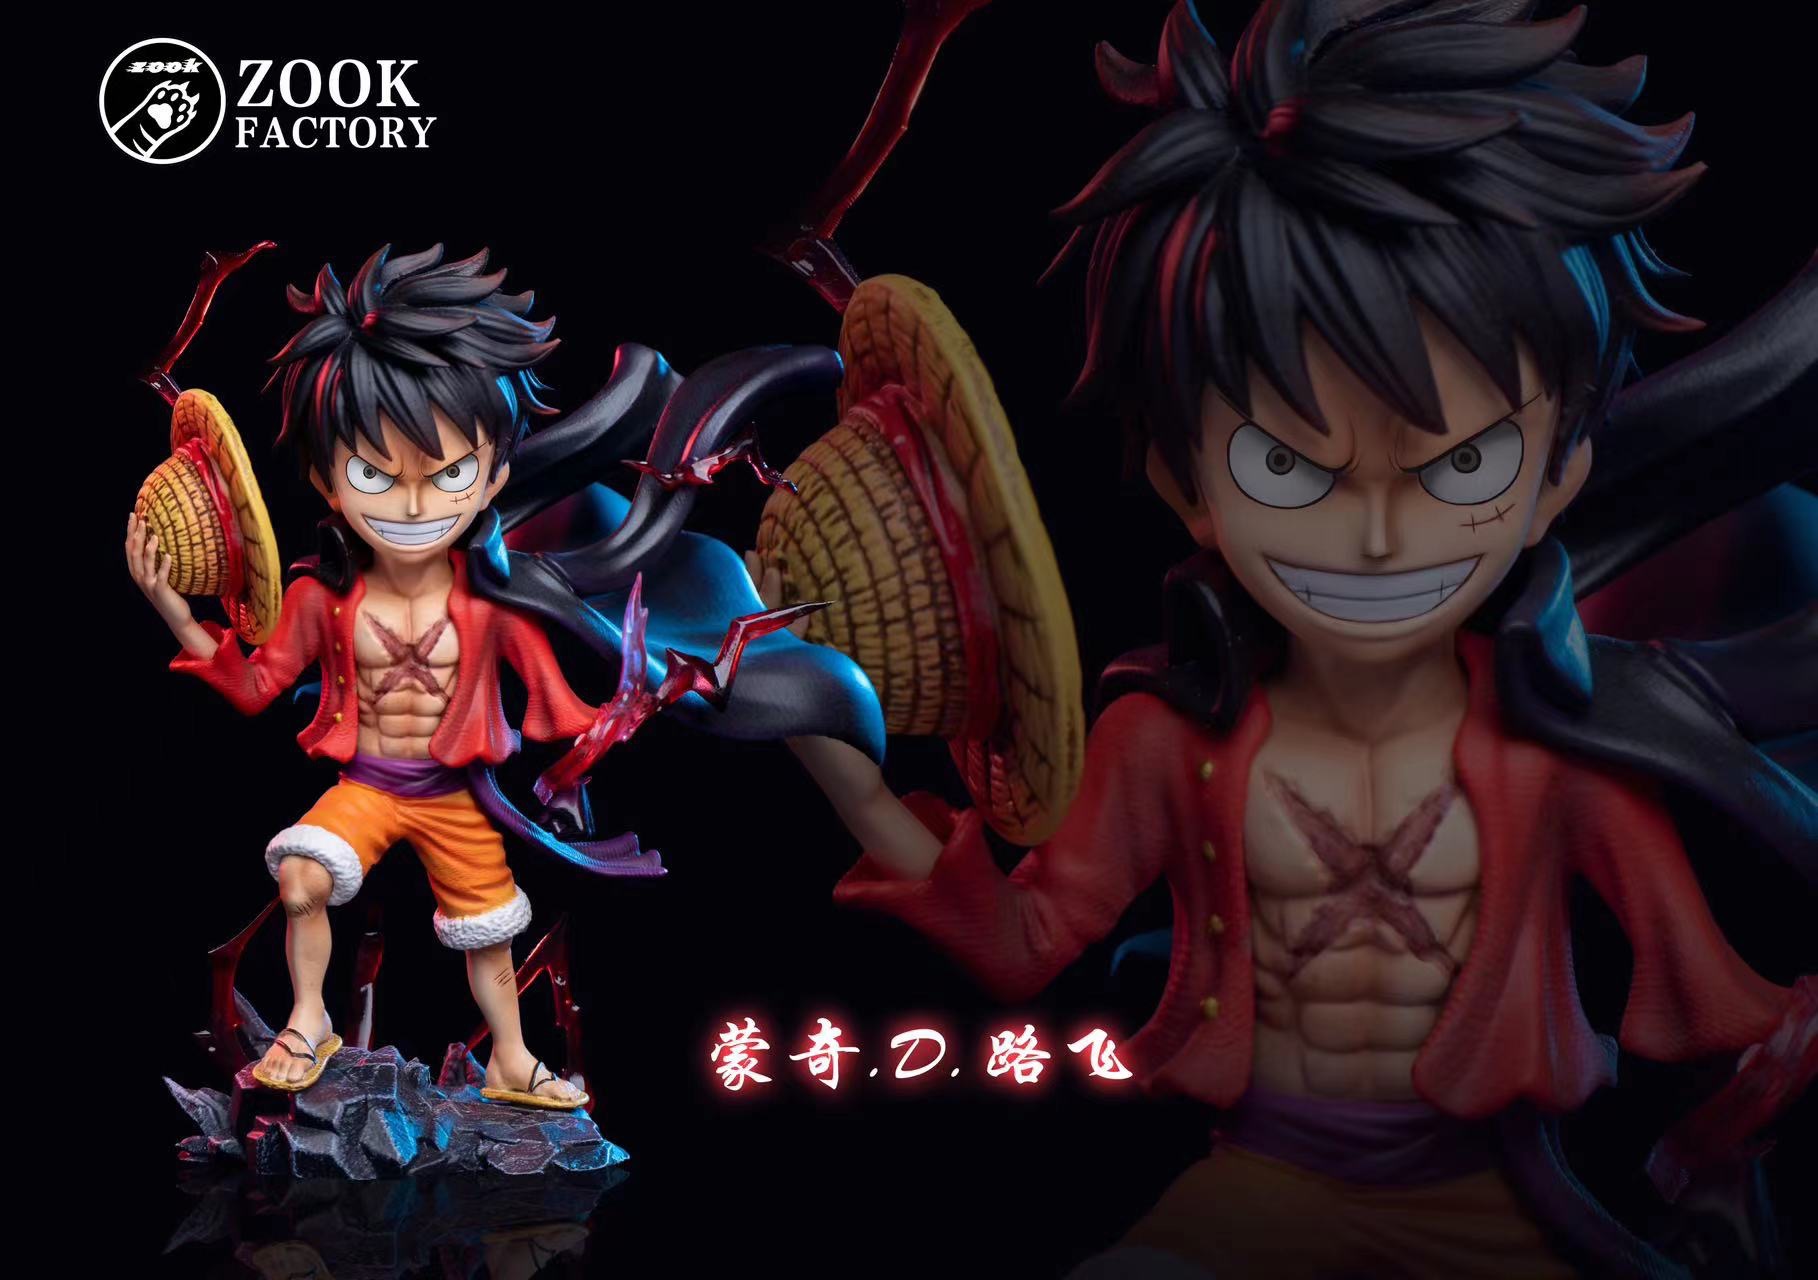 Law x Luffy x Kid by Zook Factory (มัดจำ) [[ SOLDOUT ]]